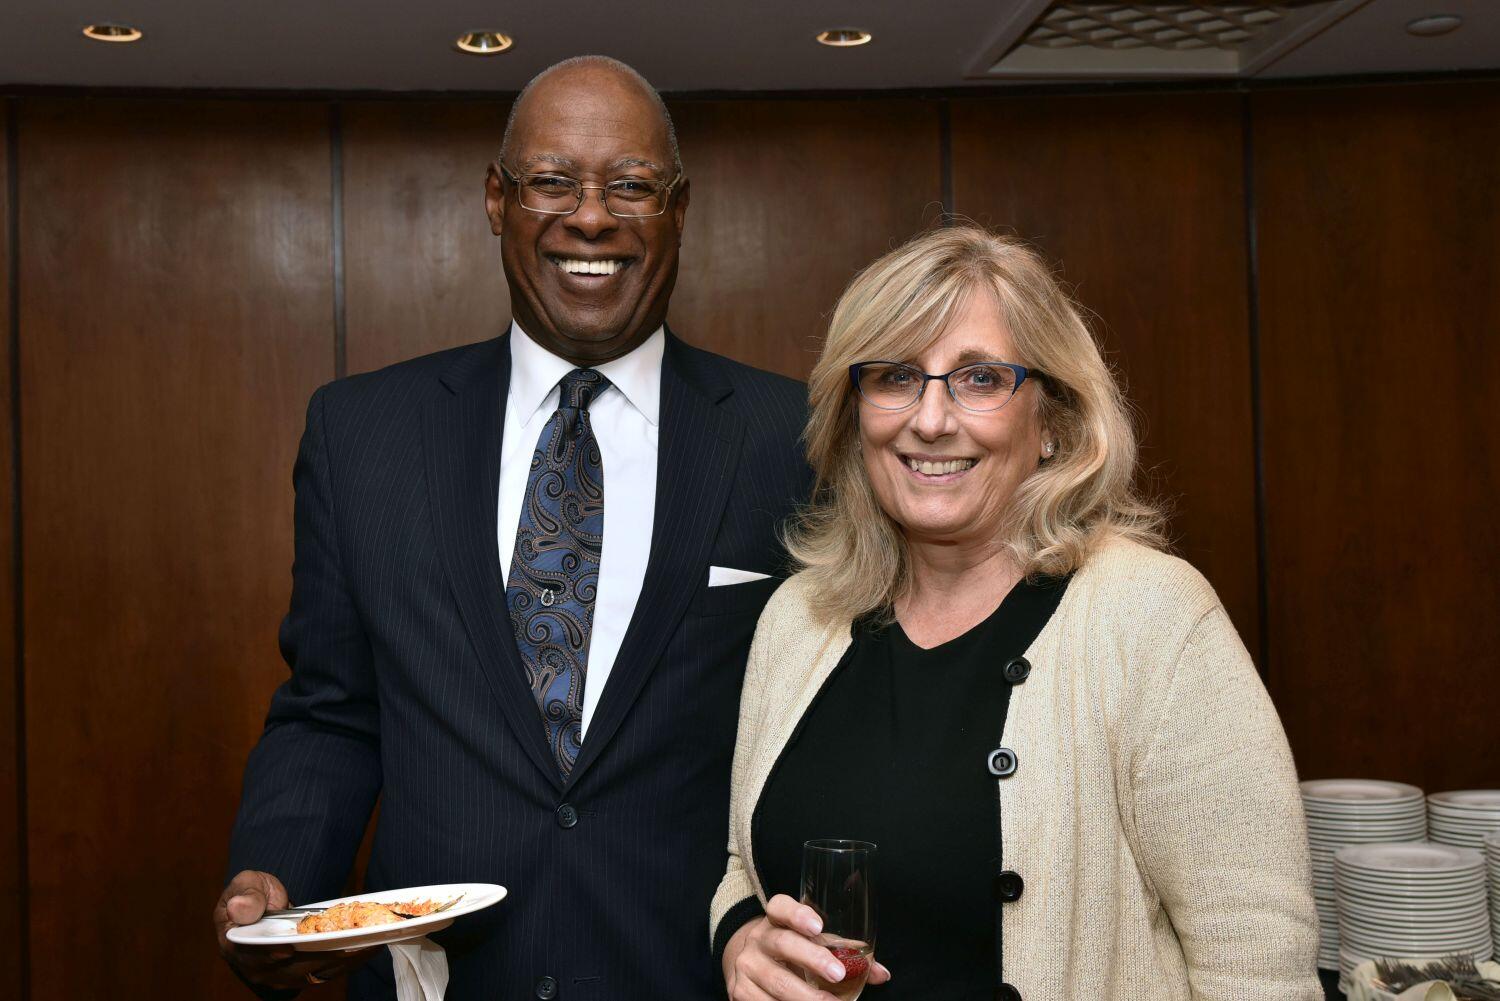 Judge Lawson and Judge Cavanaugh - Law Firm Diversity and Inclusion